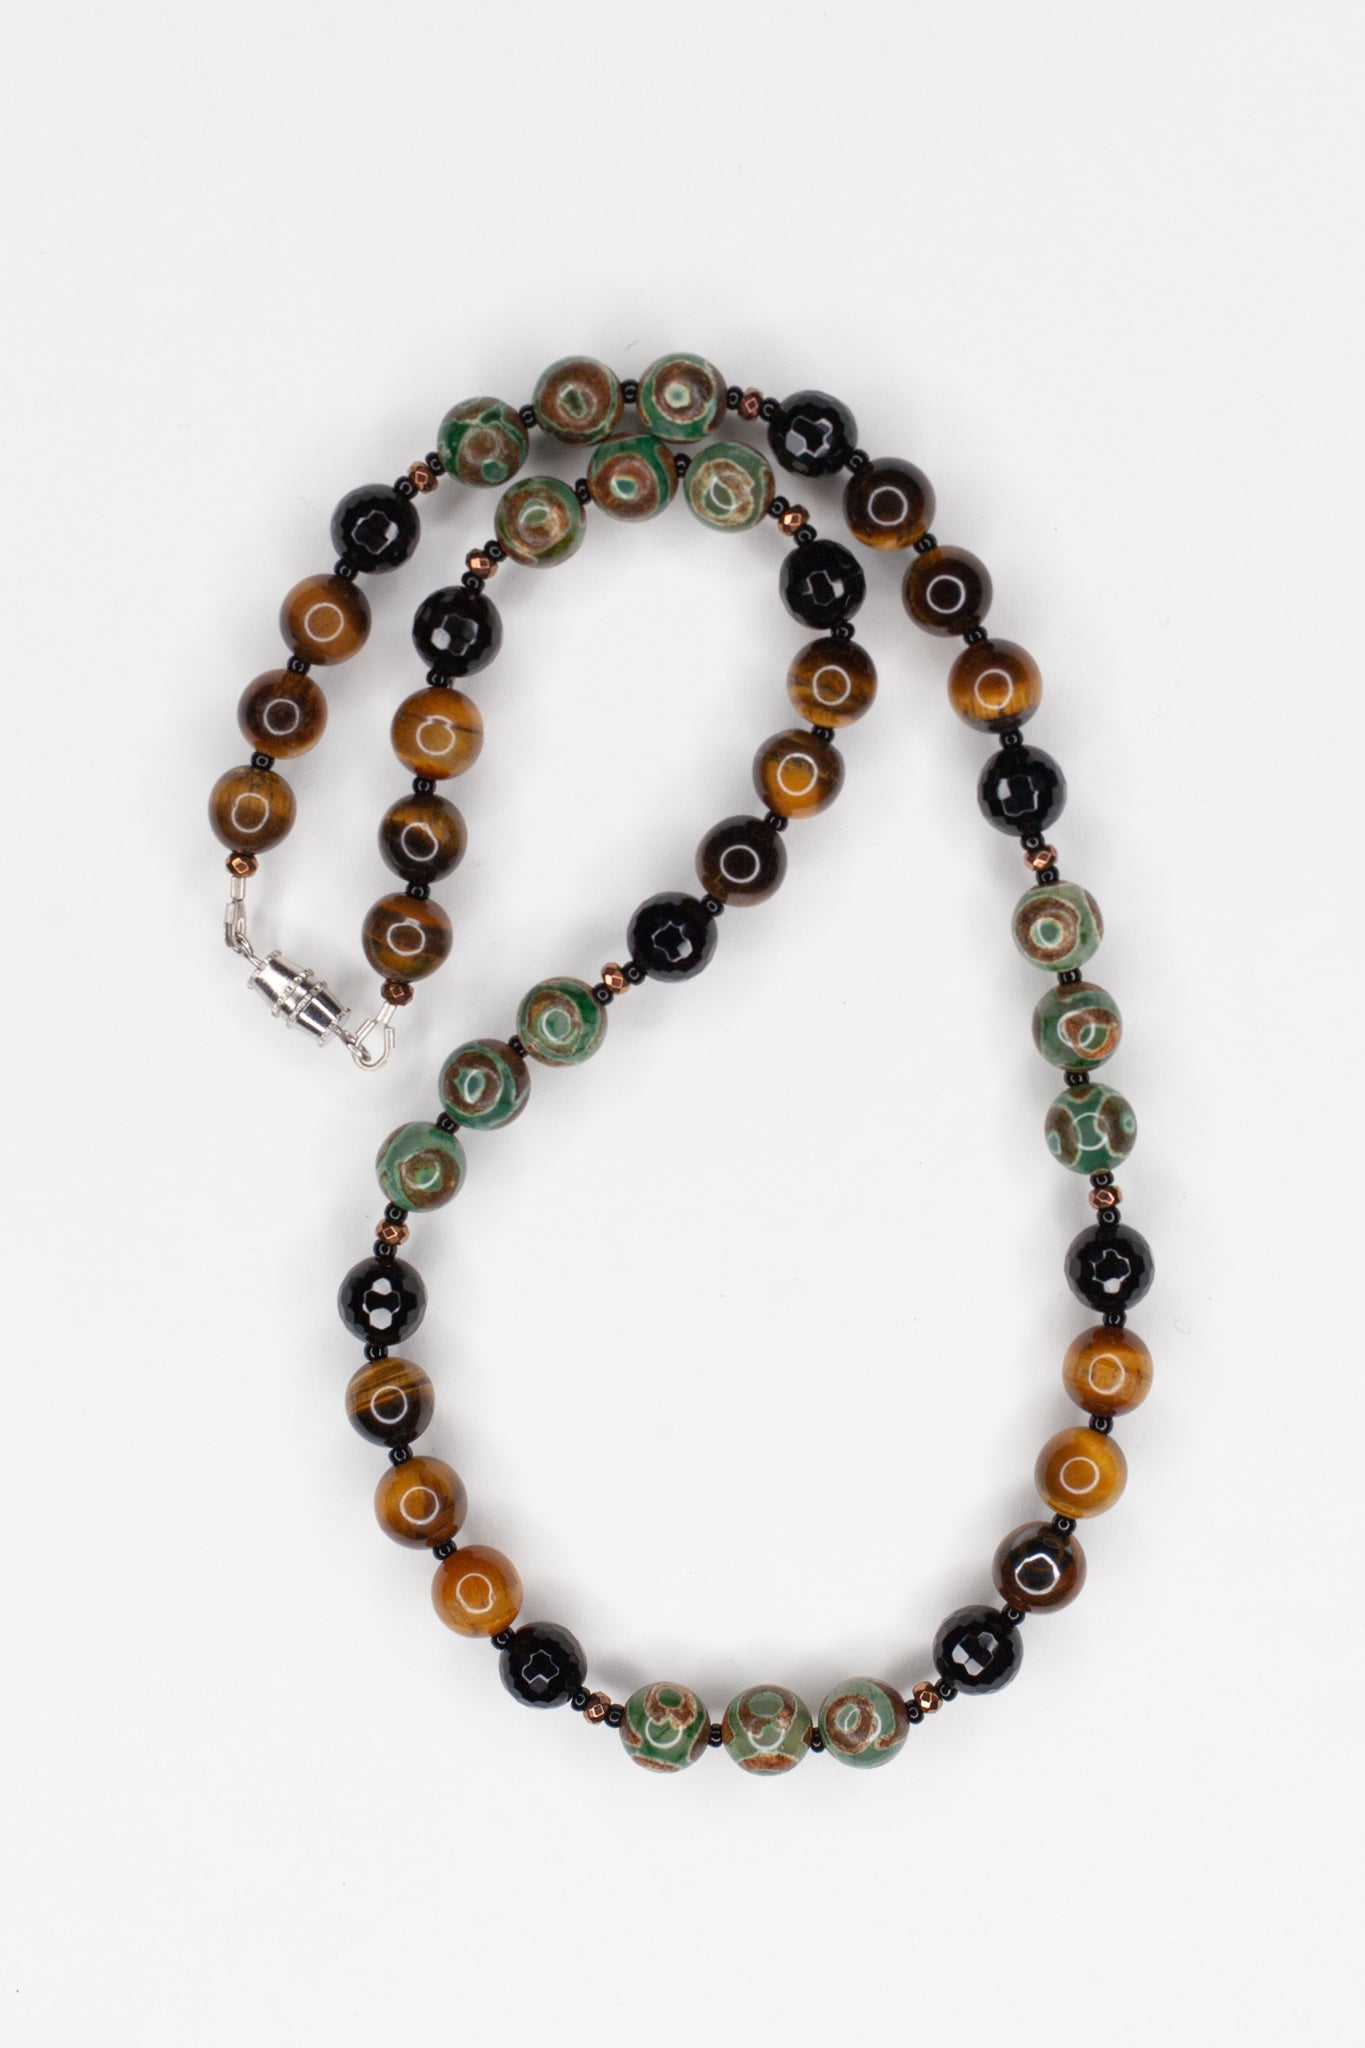 18" Long Tiger Eye Necklace with Evil Eye Agate & Hematite Beads